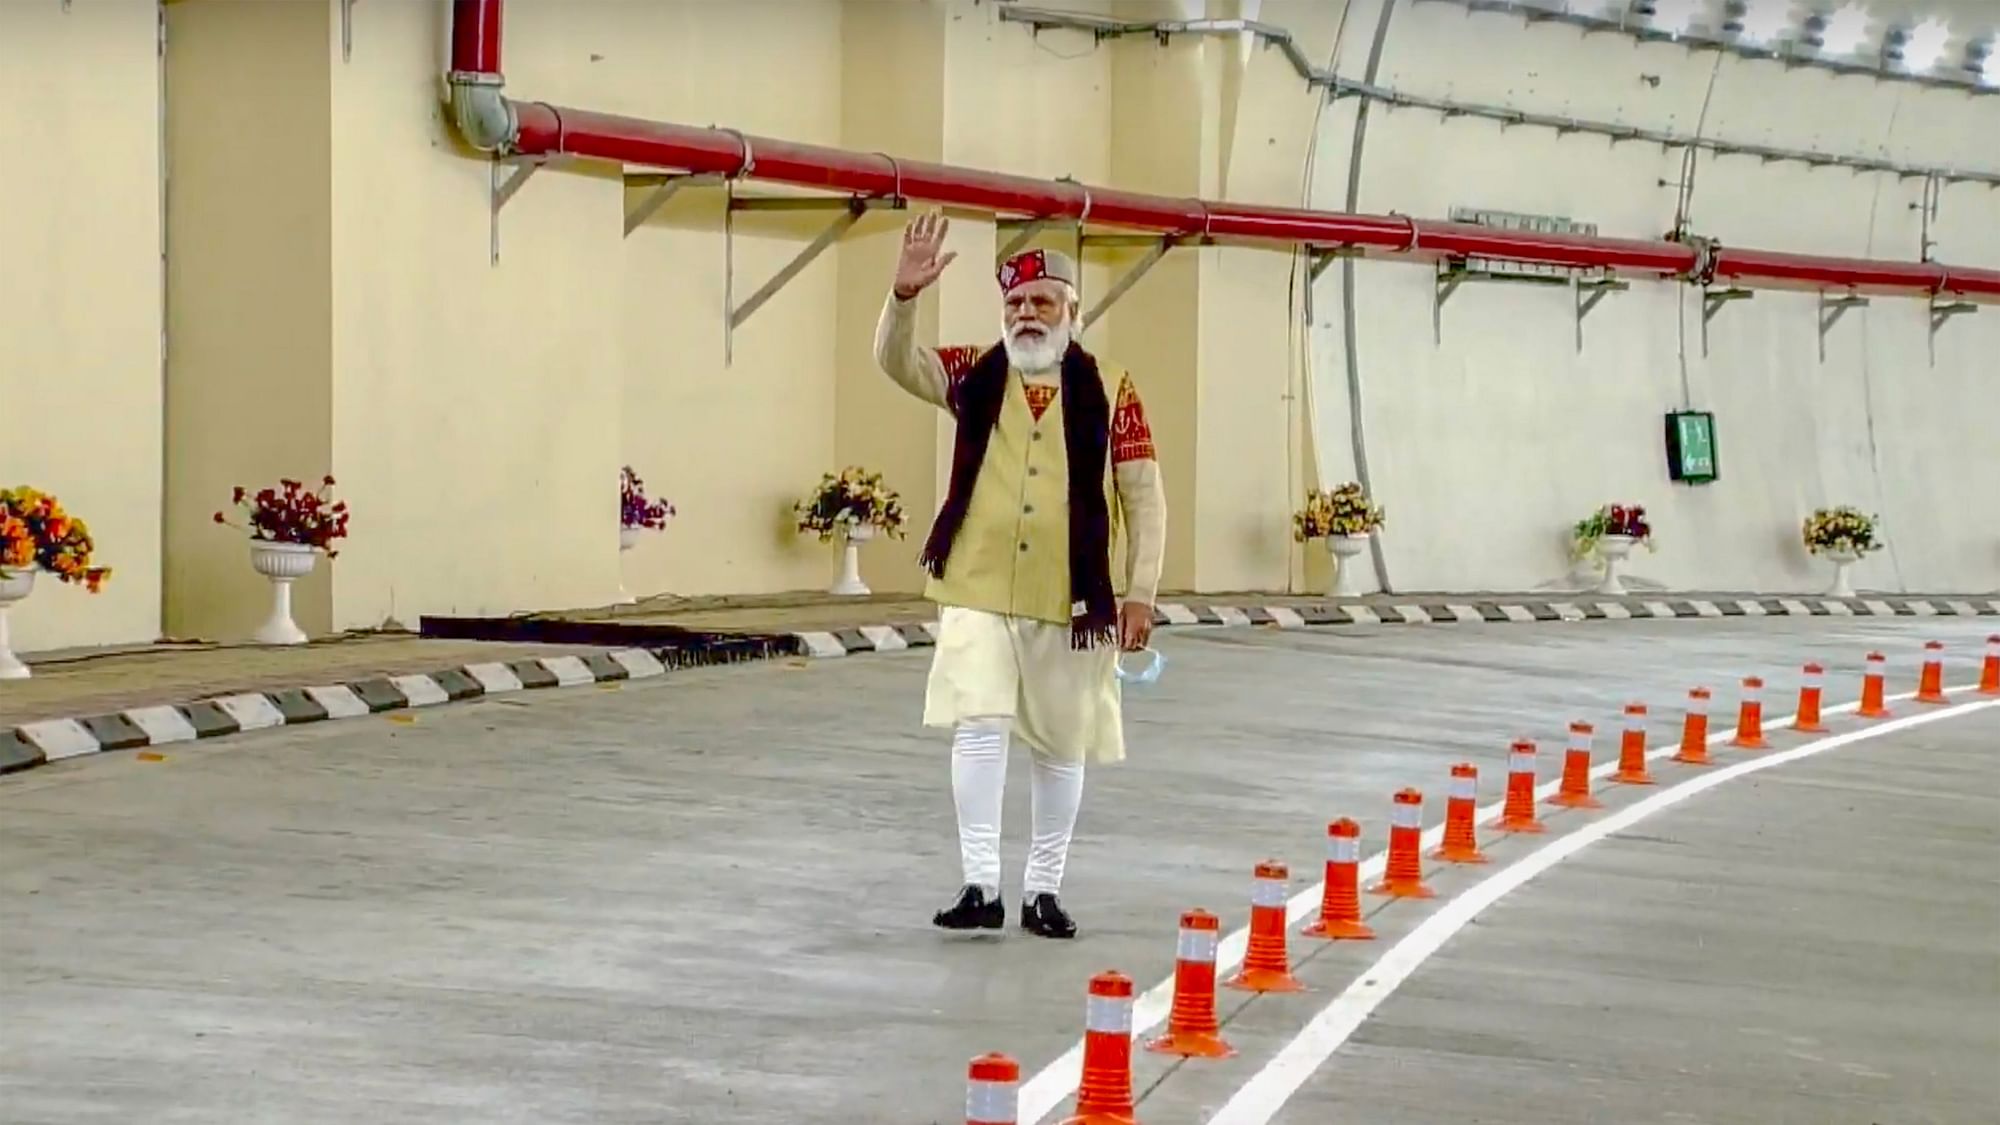 Prime Minister Narendra Modi on Saturday, 3 October, inaugurated the Atal Tunnel beneath the Rohtang Pass in Himachal Pradesh.